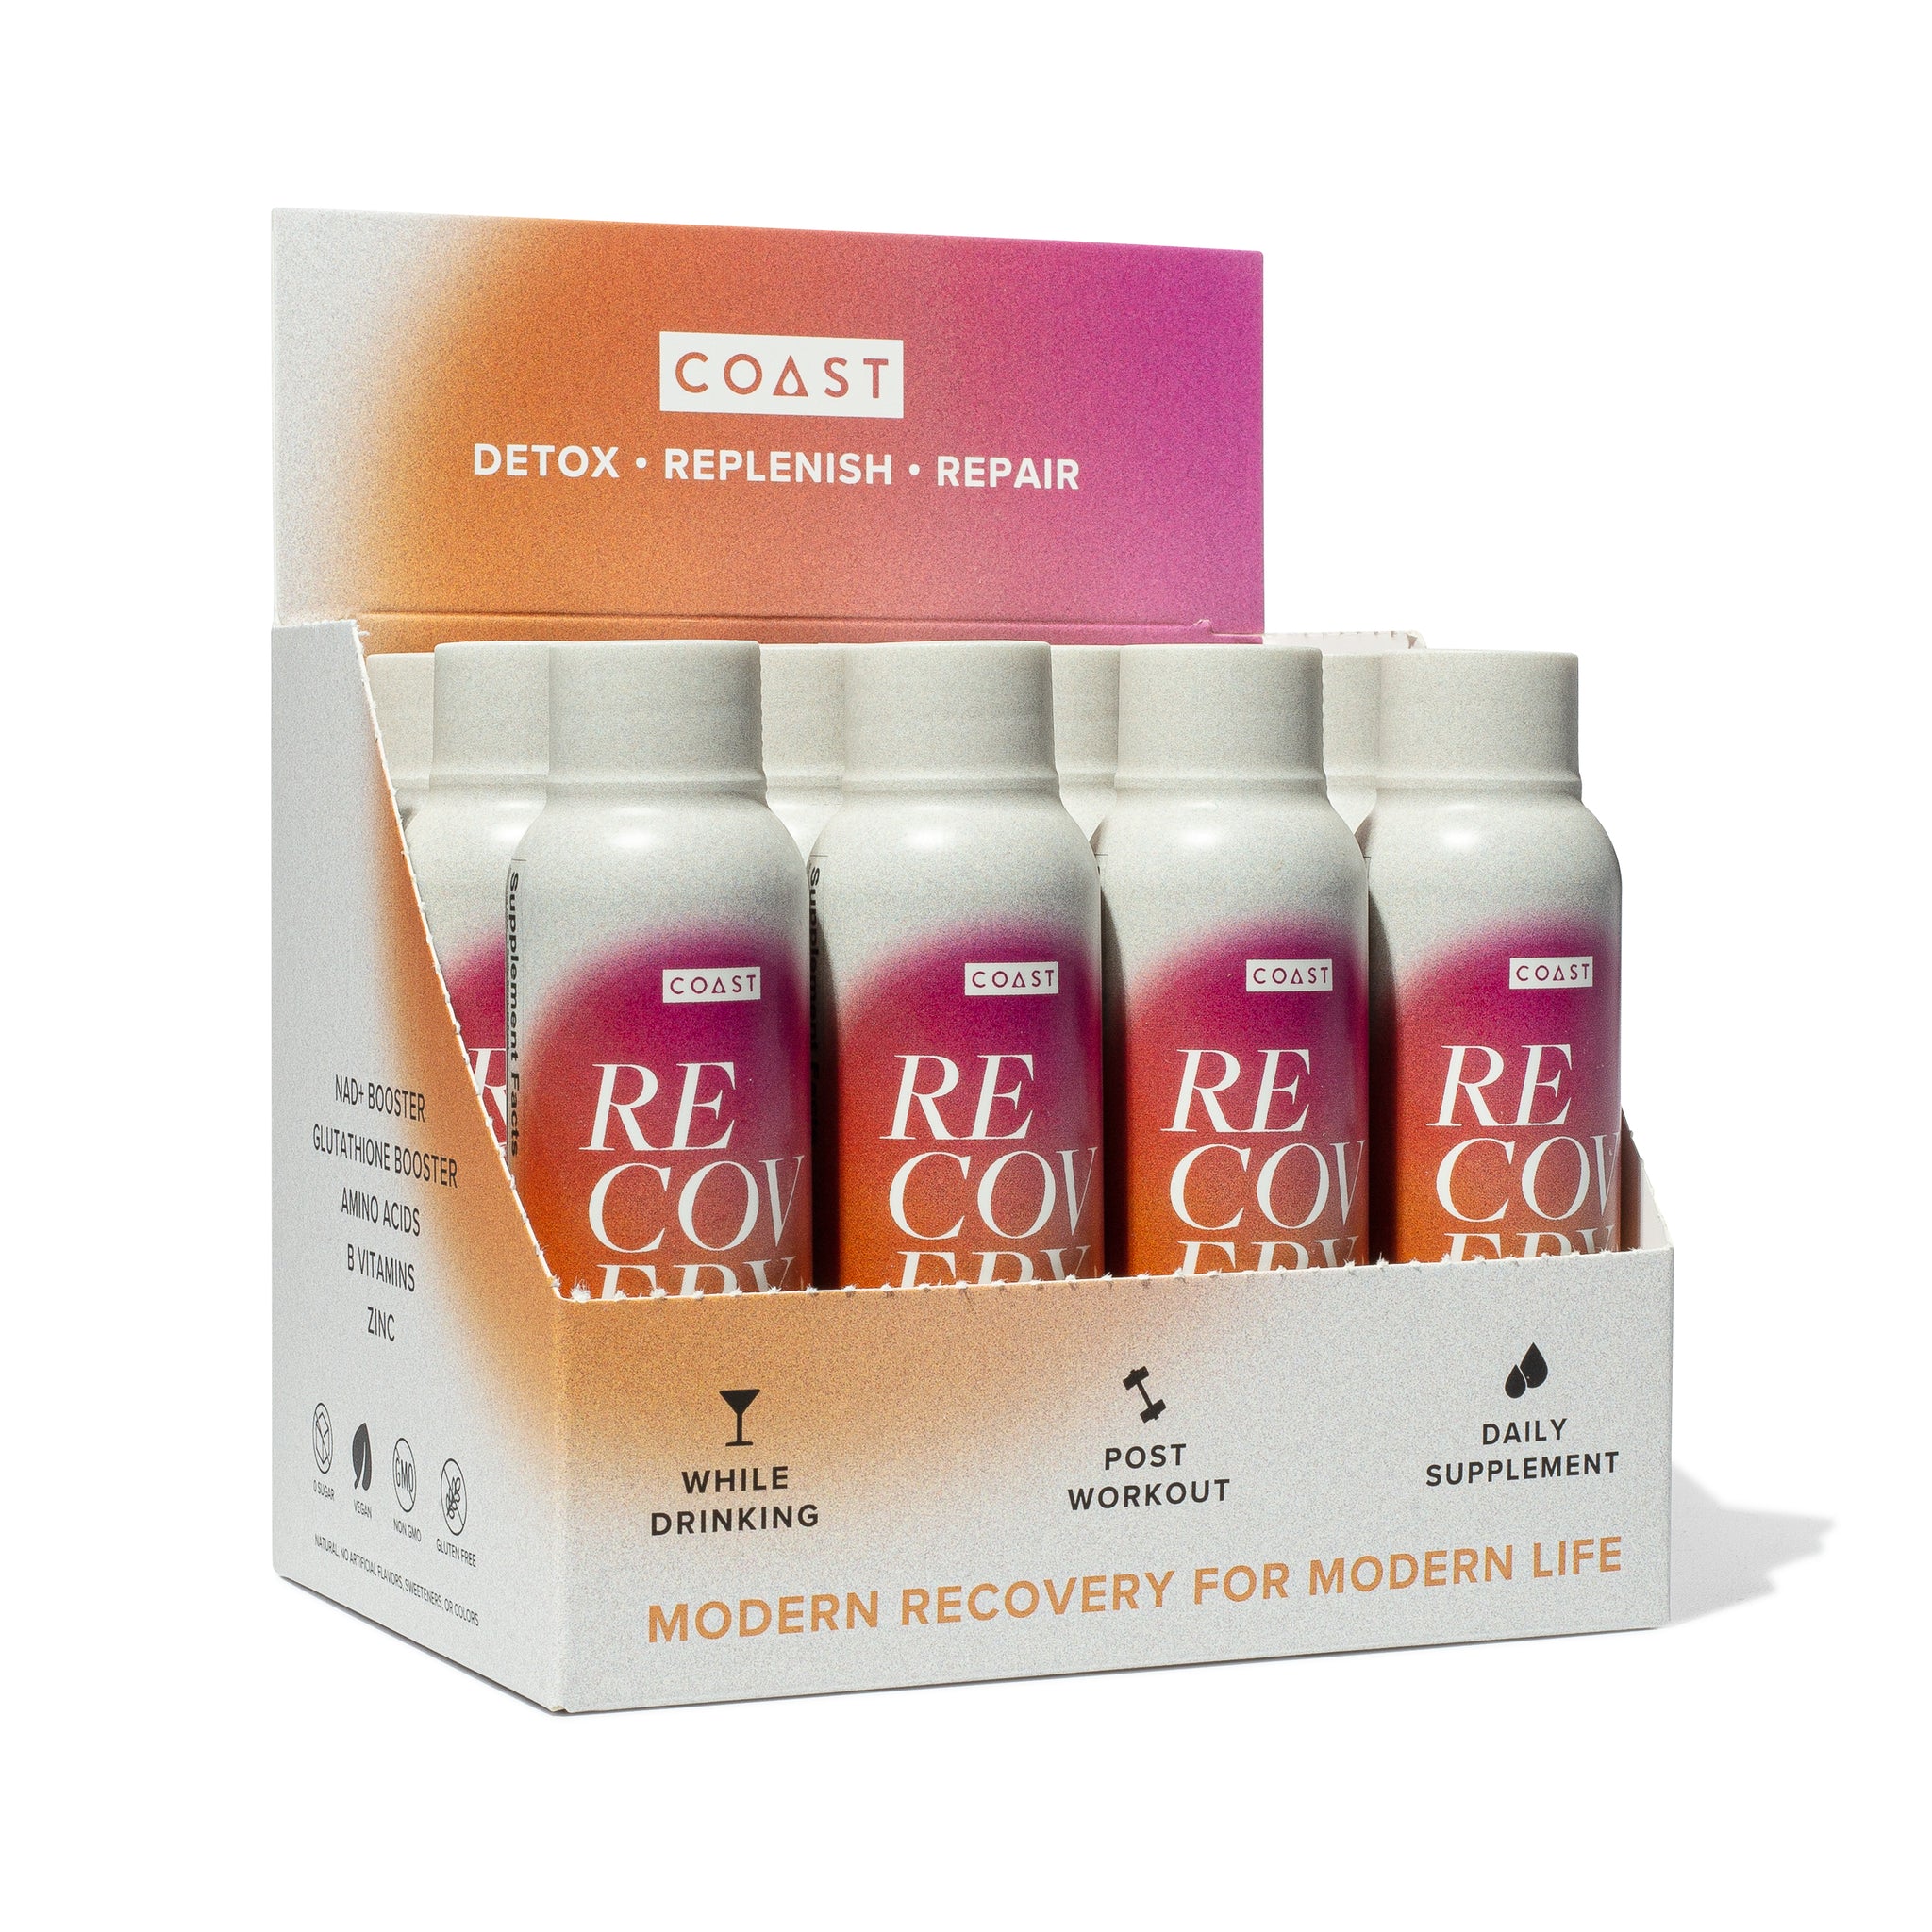 Box of 12 COAST Recovery+. Take COAST Recovery+ drink while drinking, post workout, or as a daily supplement as a natural recovery, detox and hangover cure.